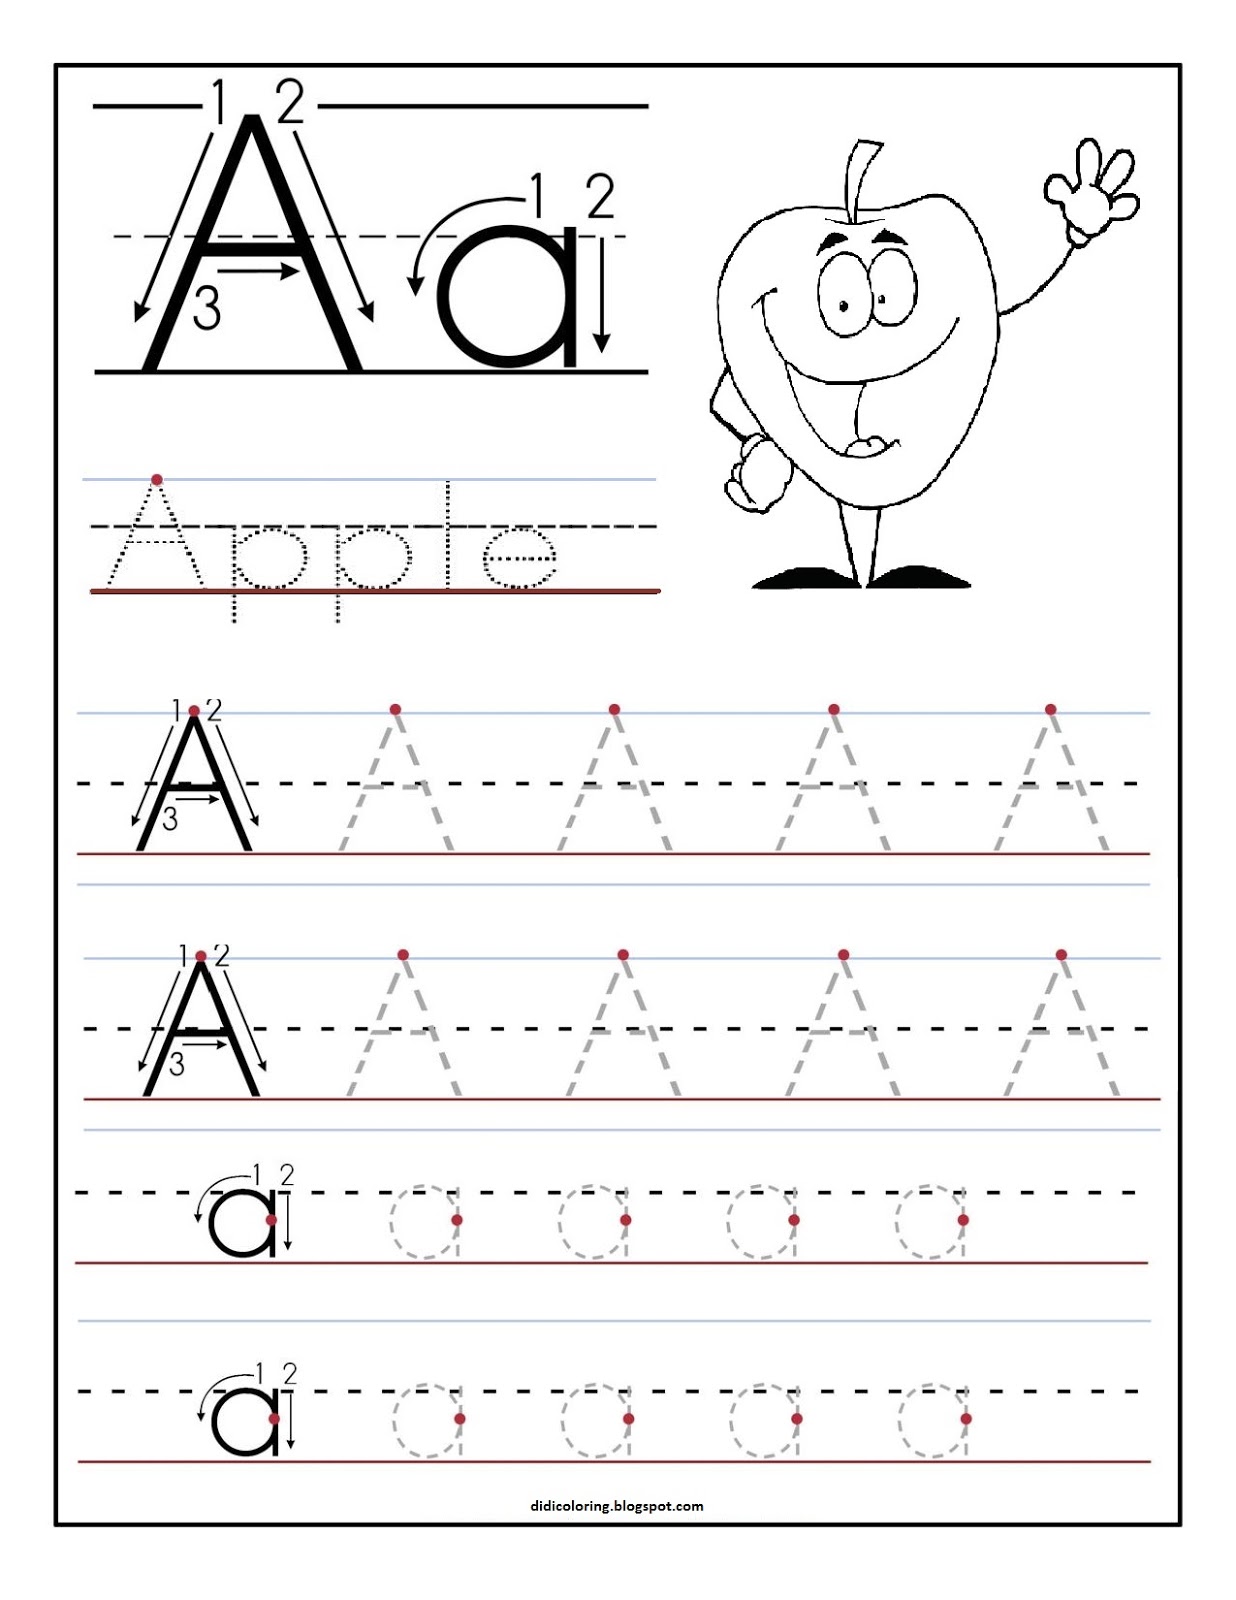 Didi coloring Page: Free printable worksheet letter A for your